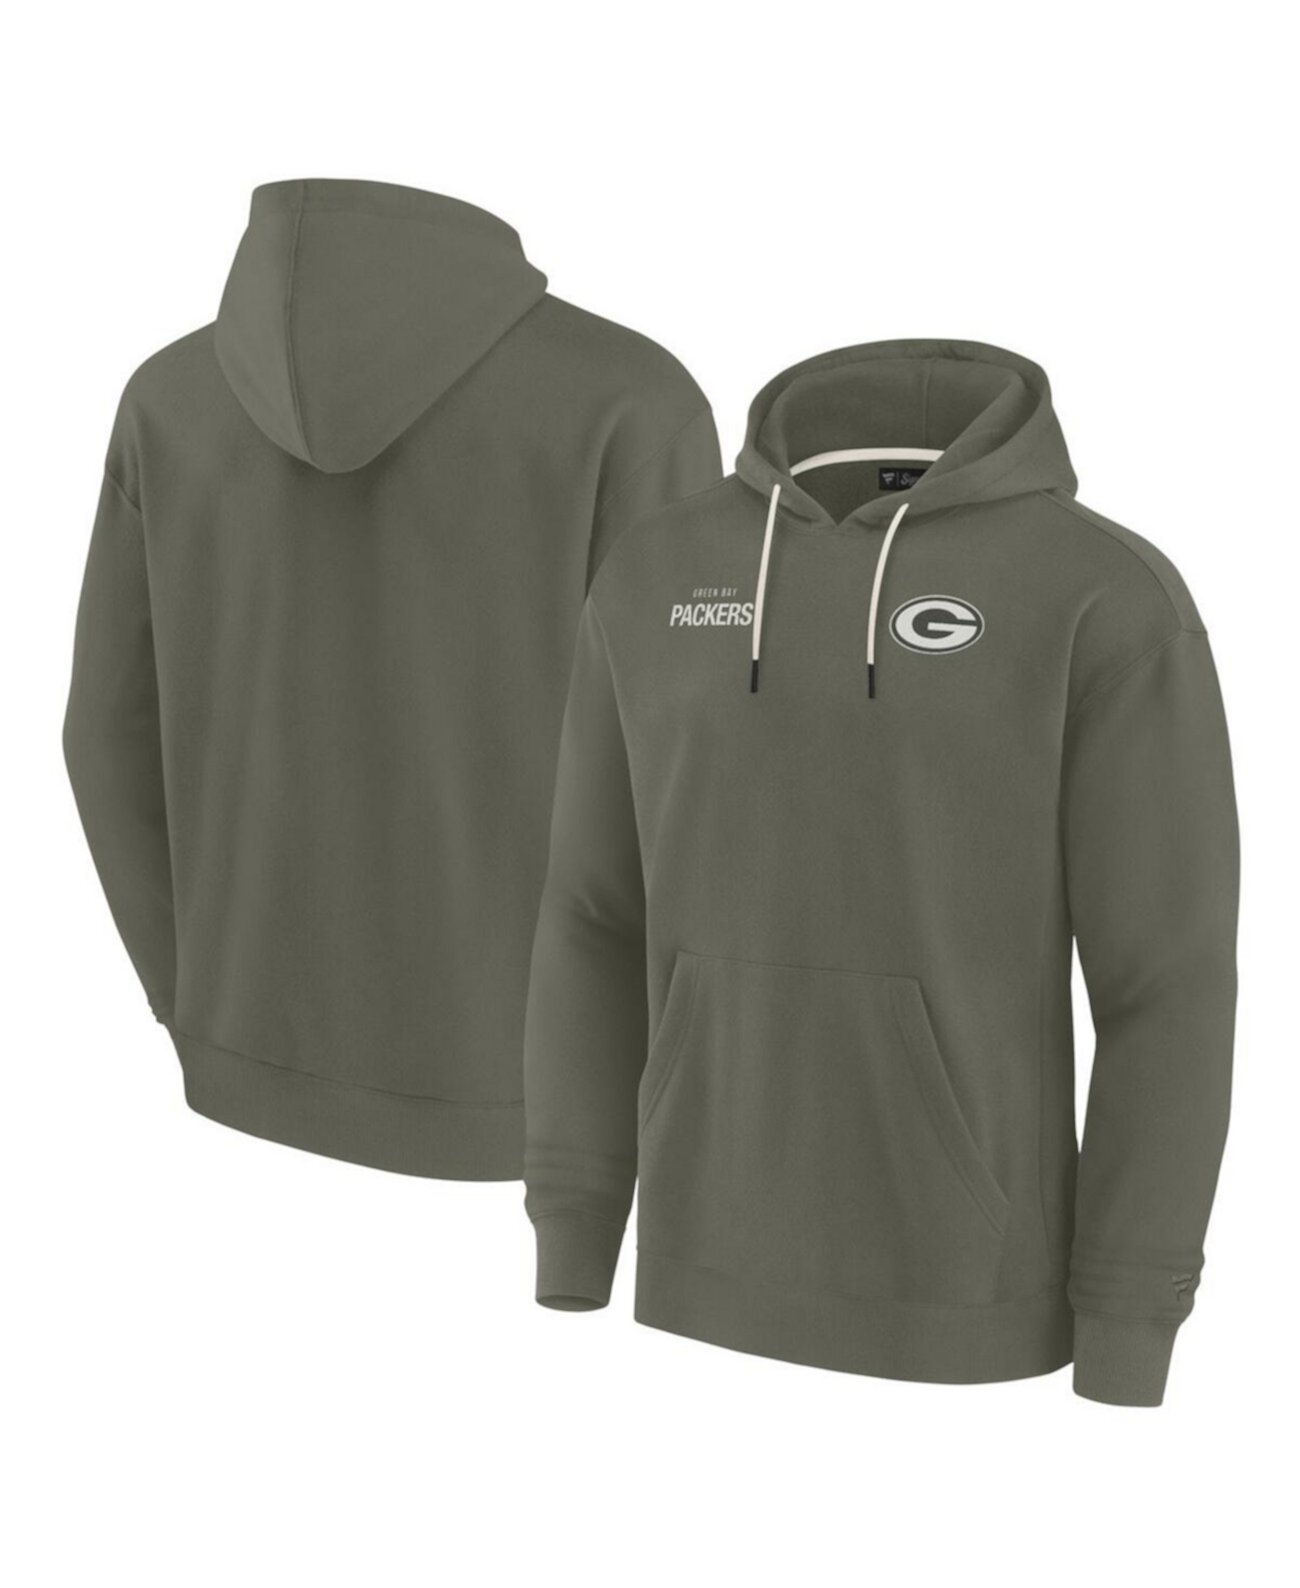 Men's and Women's Olive Green Bay Packers Elements Super Soft Fleece Pullover Hoodie Fanatics Signature